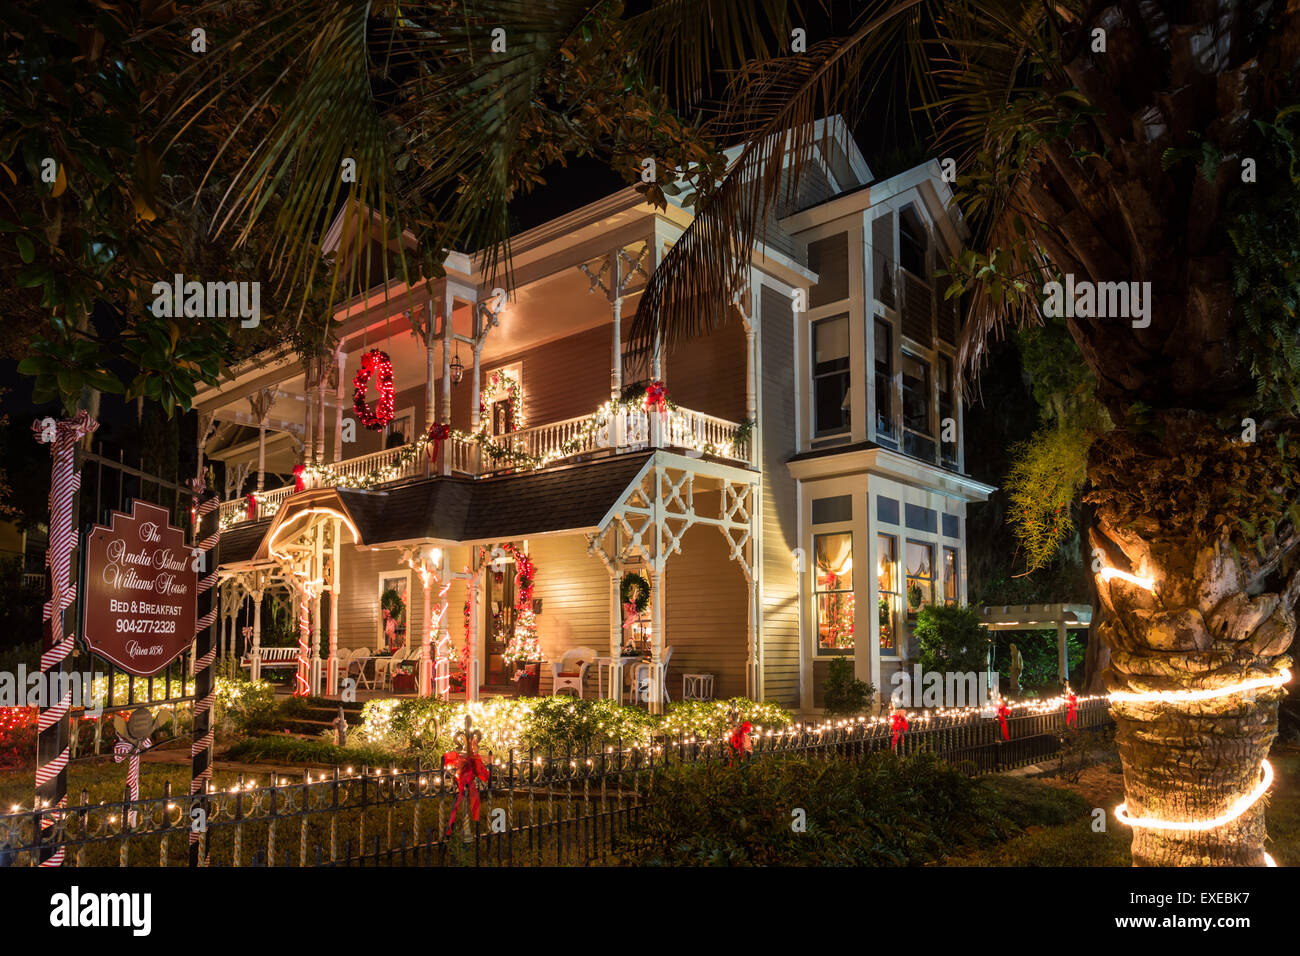 Christmas at The Williams House Bed and Breakfast, Amelia Island, Florida Stock Photo